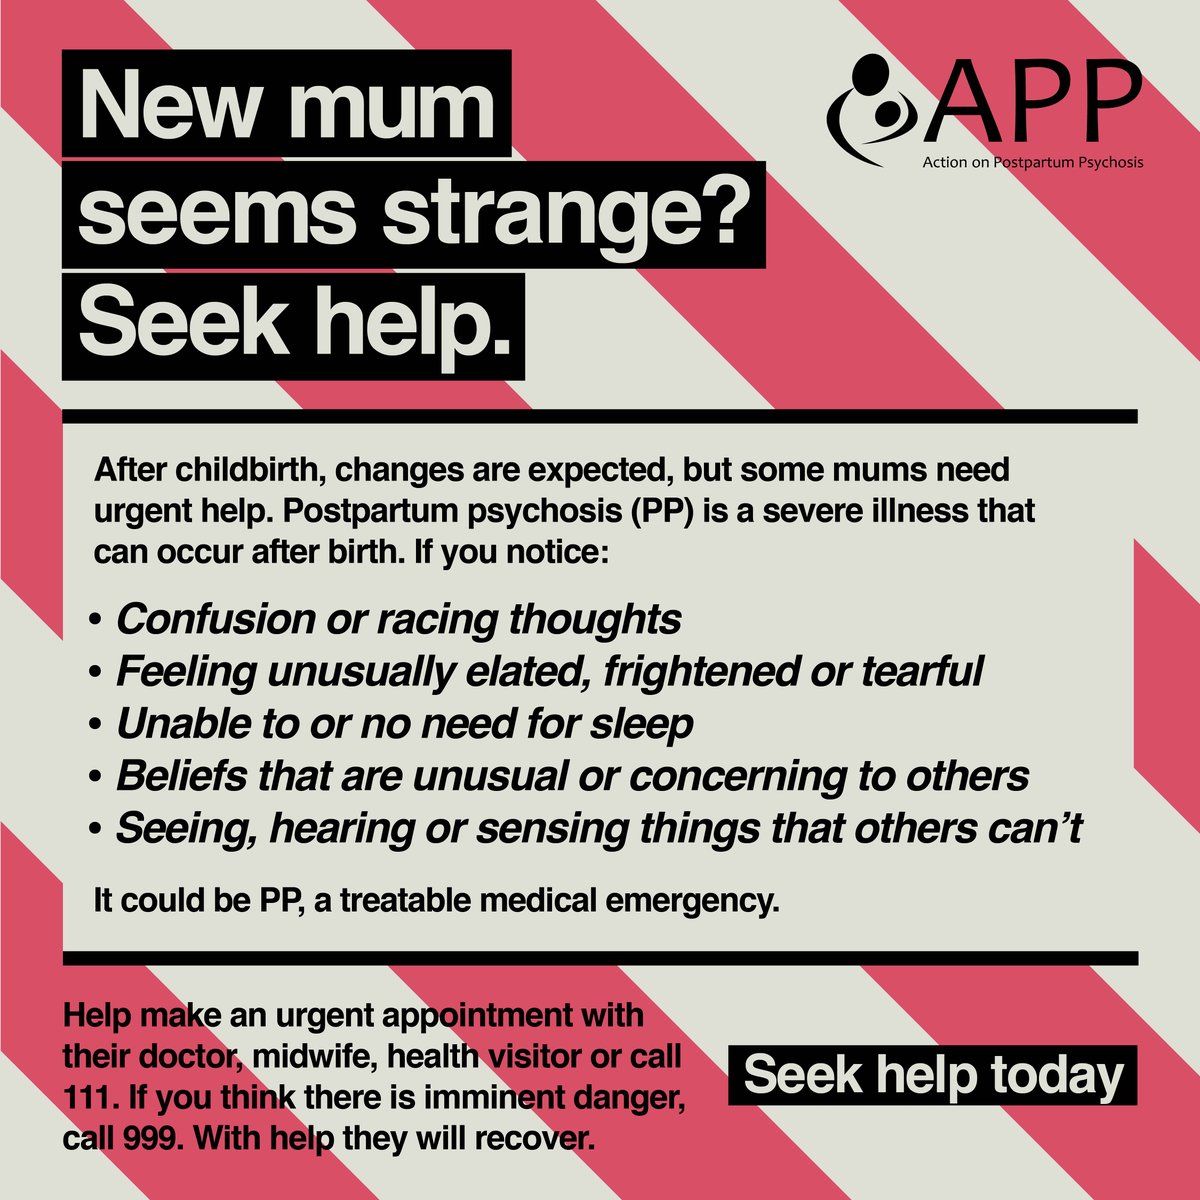 New mum seems strange? Seek help. It could be postpartum psychosis, a treatable medical emergency. Help make an urgent appointment with their doctor, midwife, health visitor or call 111. If you think there is imminent danger, call 999. With help they will recover.